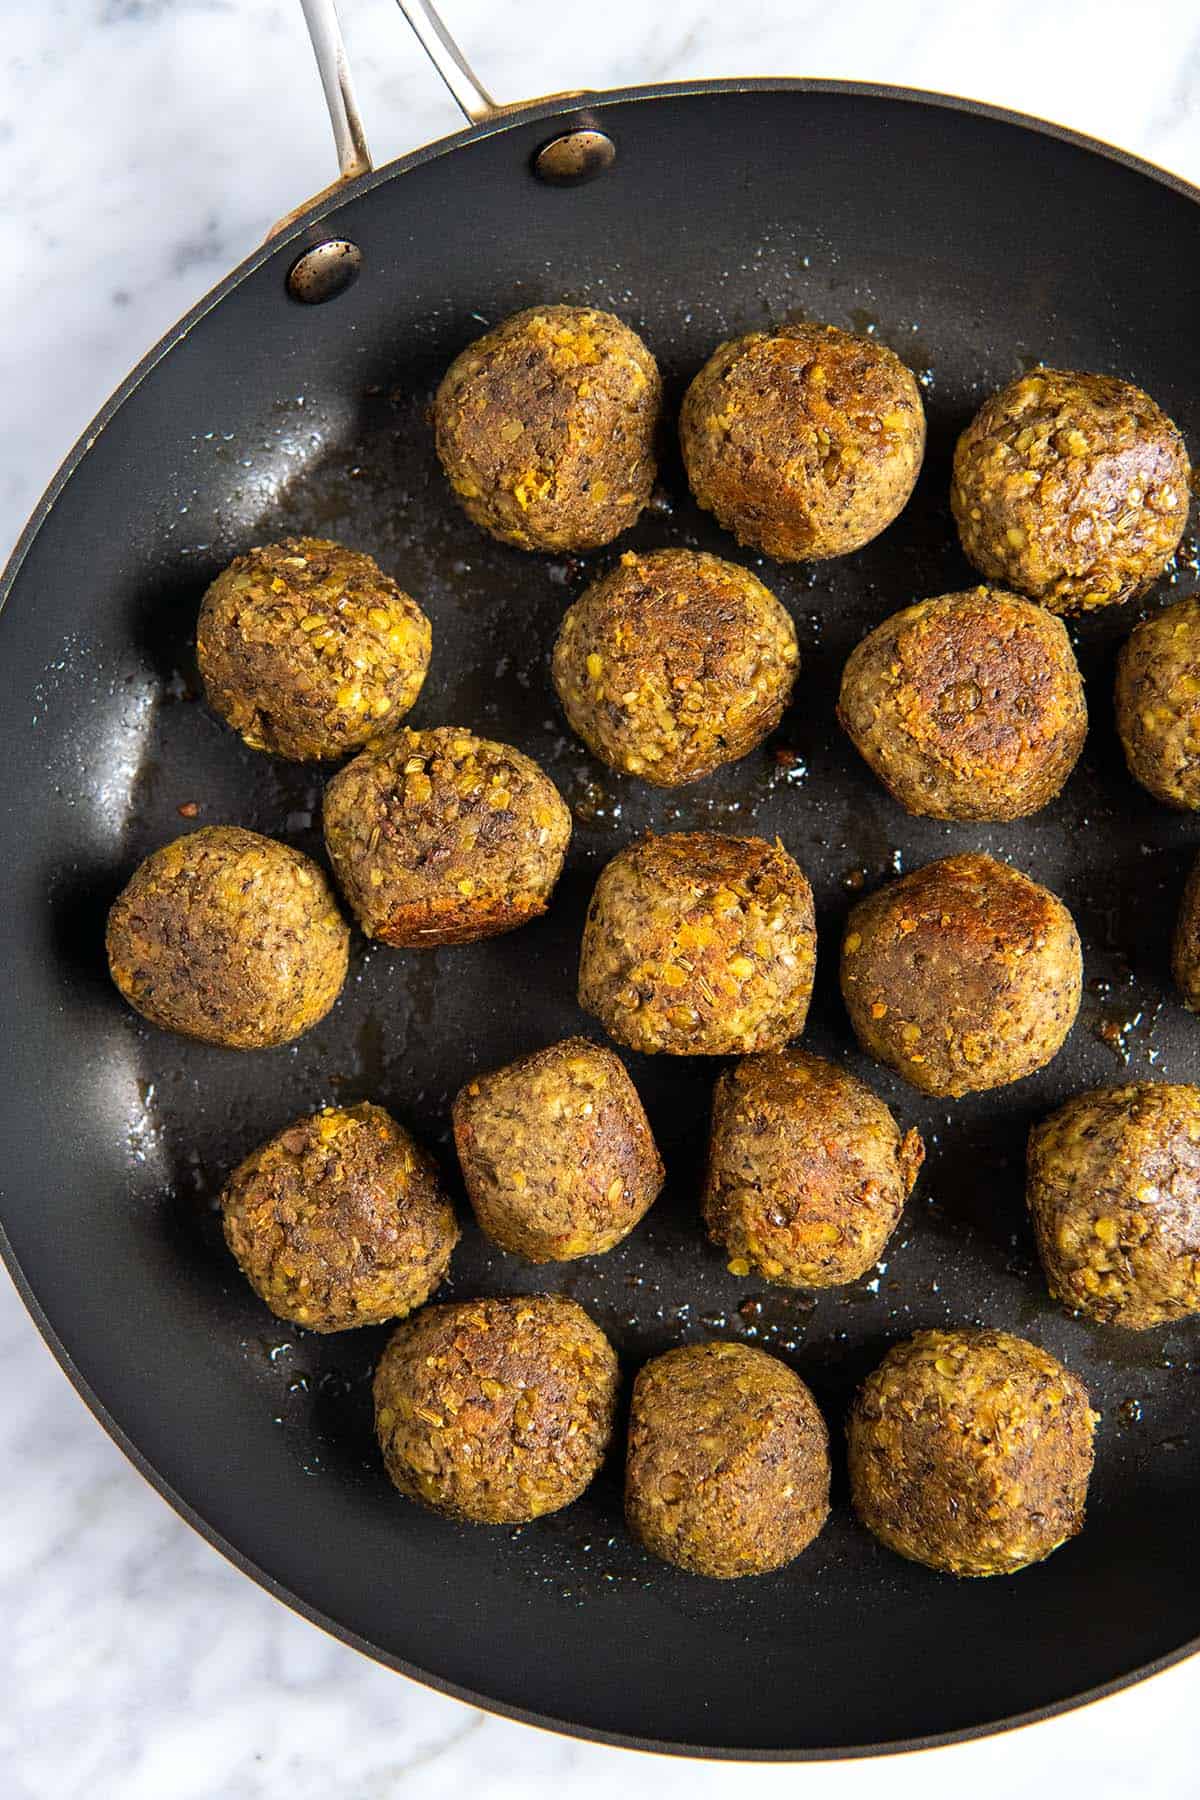 Cooking vegan meatballs on the stove